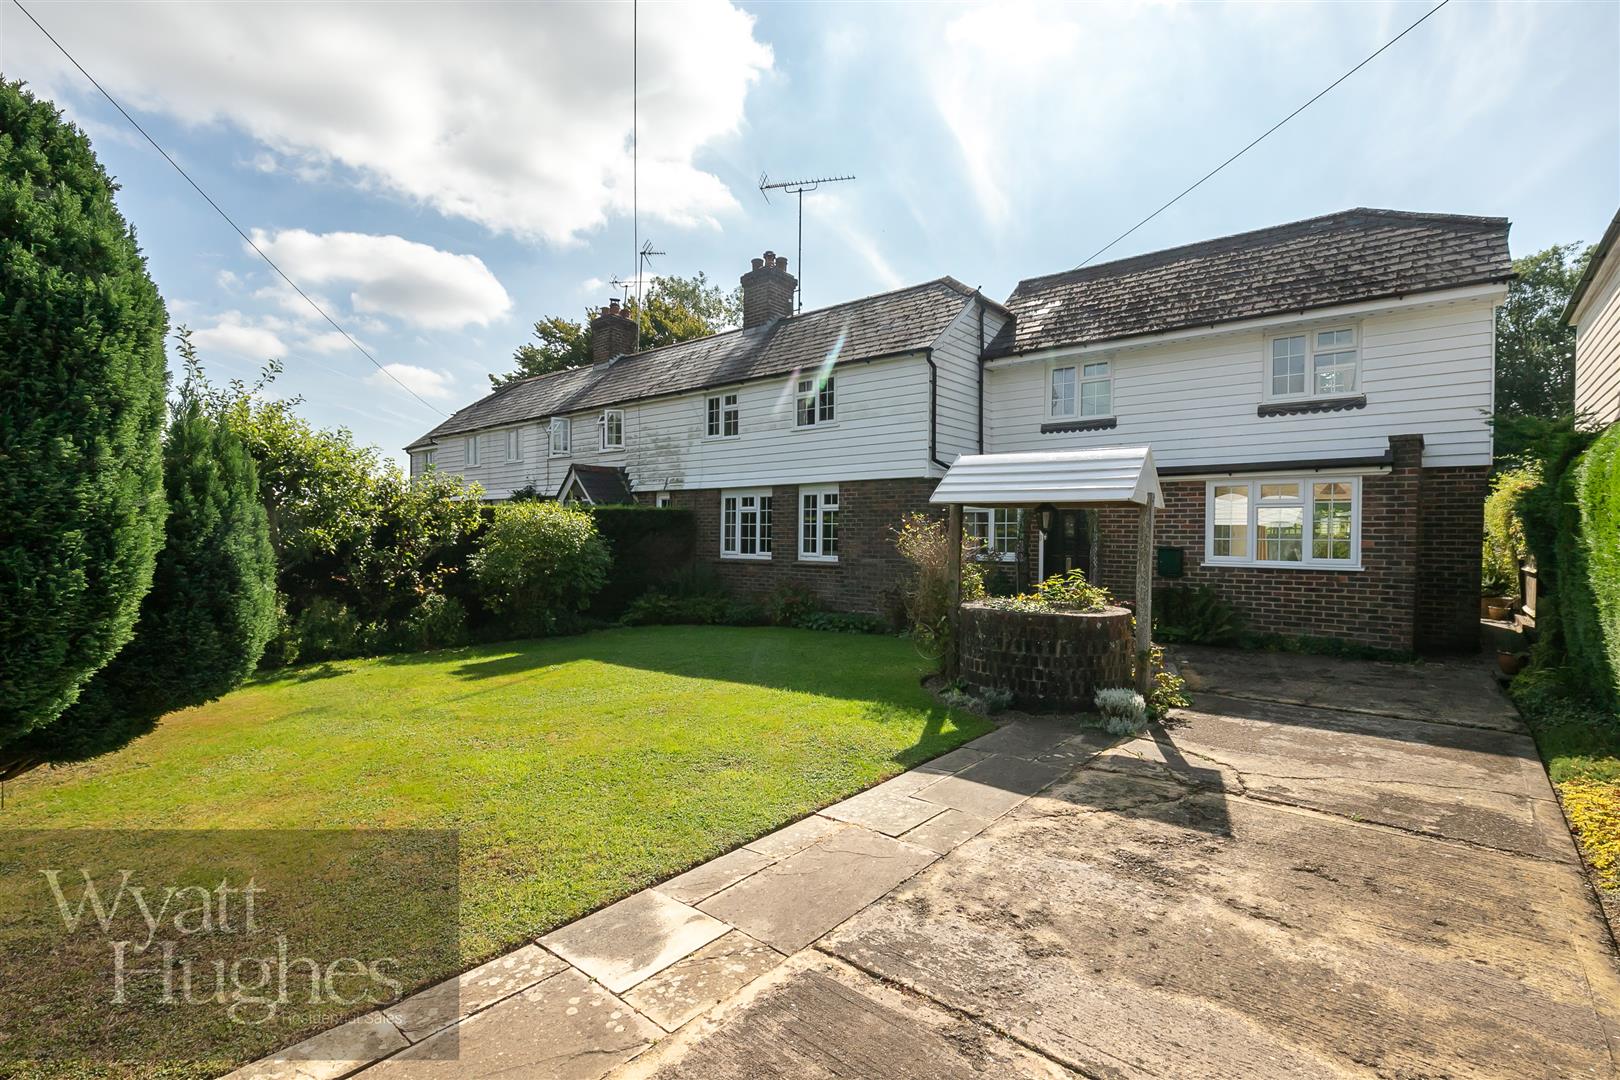 3 bed end of terrace house for sale in Lower Platts, Ticehurst - Property Image 1